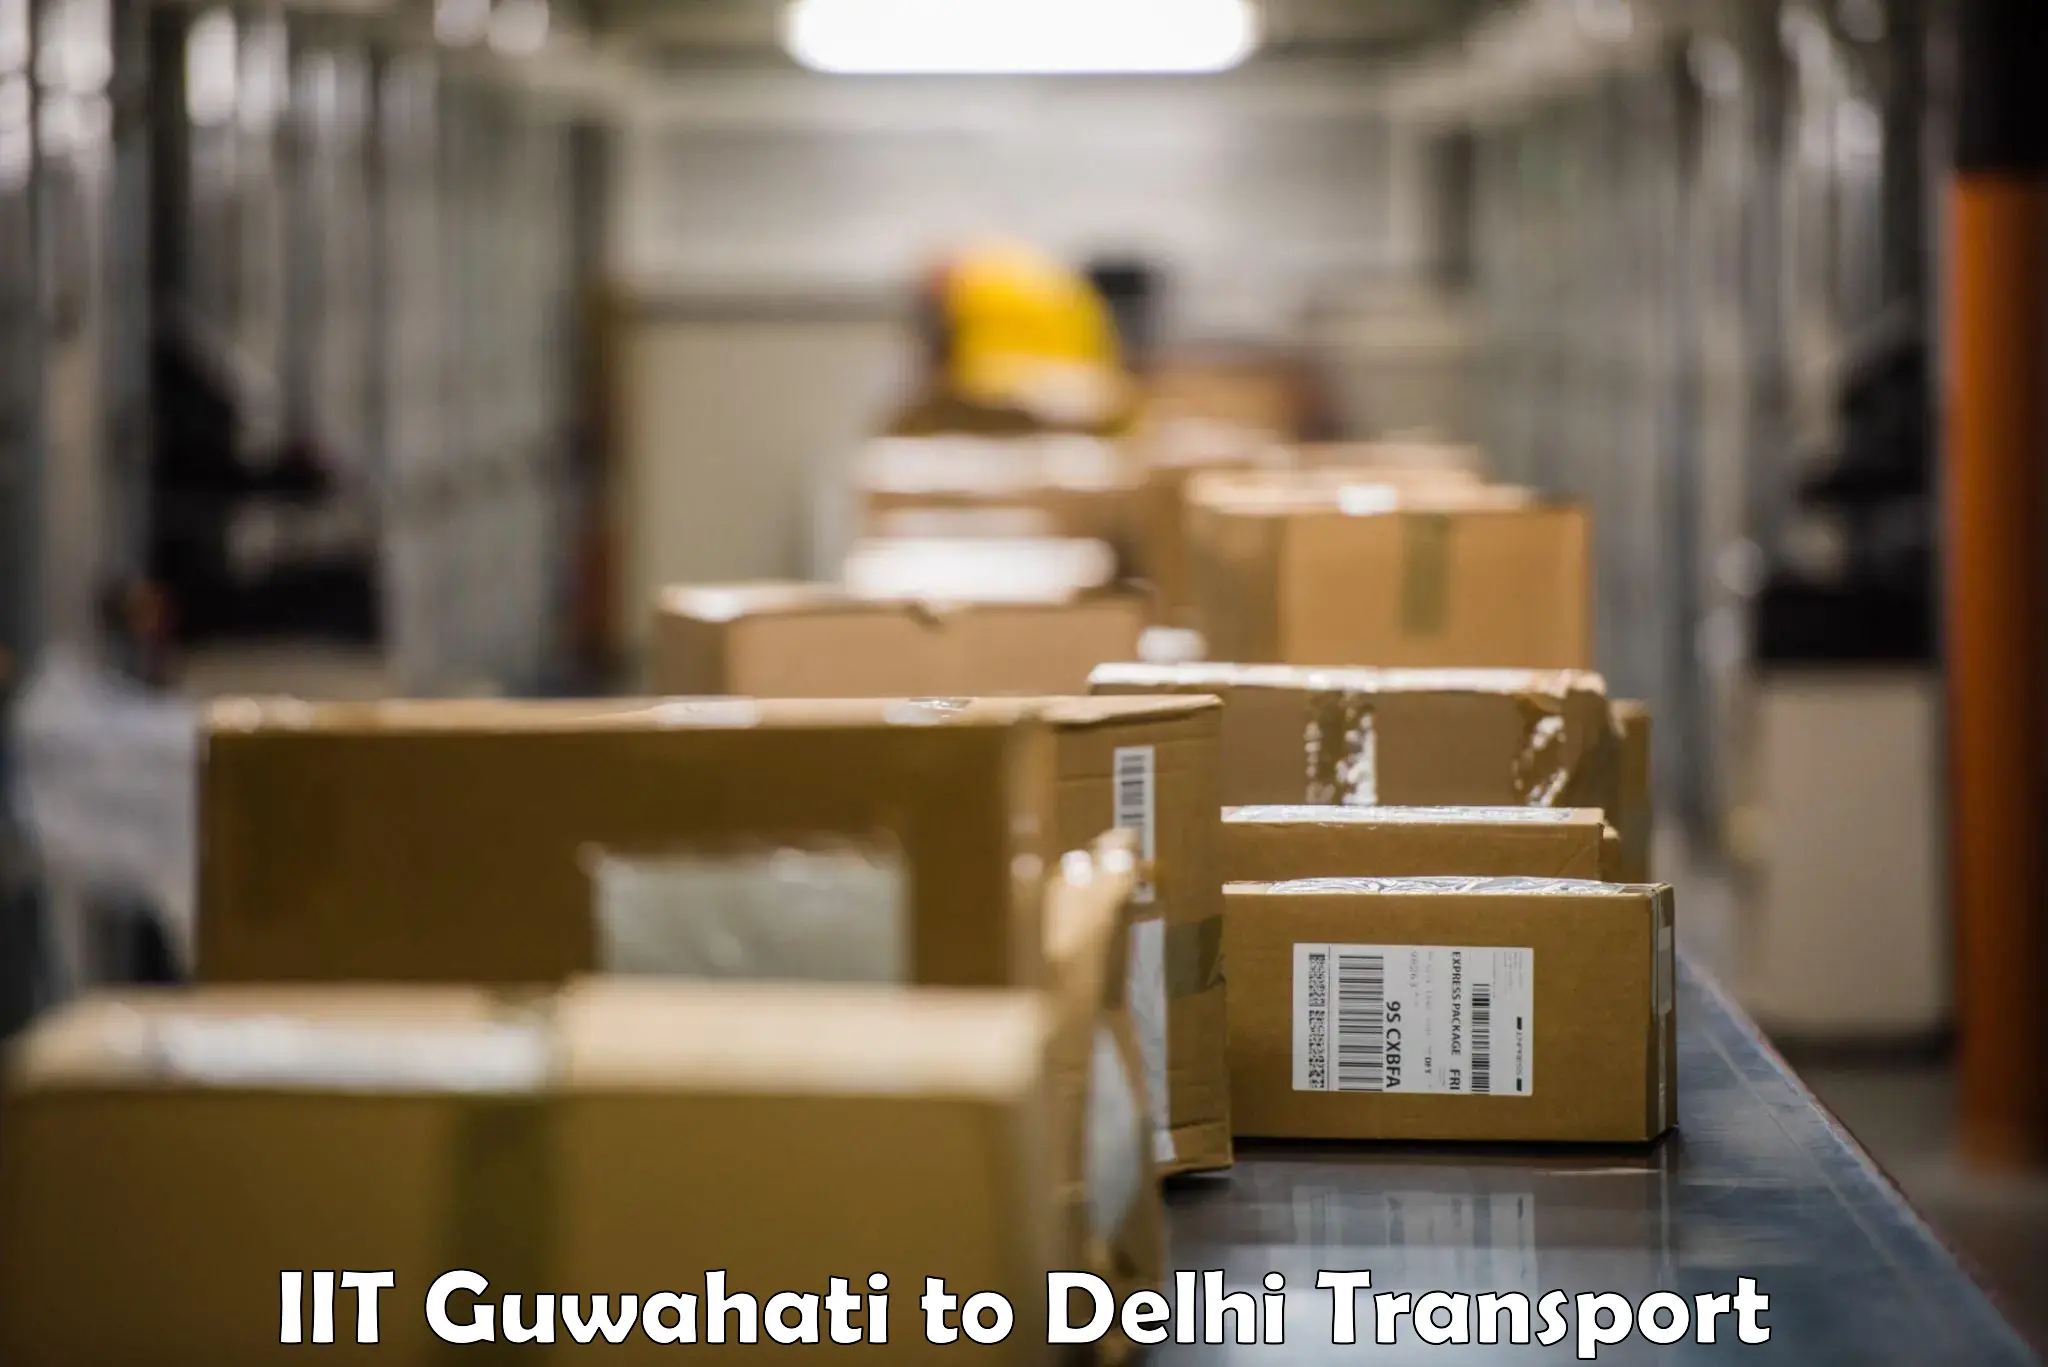 Shipping services IIT Guwahati to East Delhi